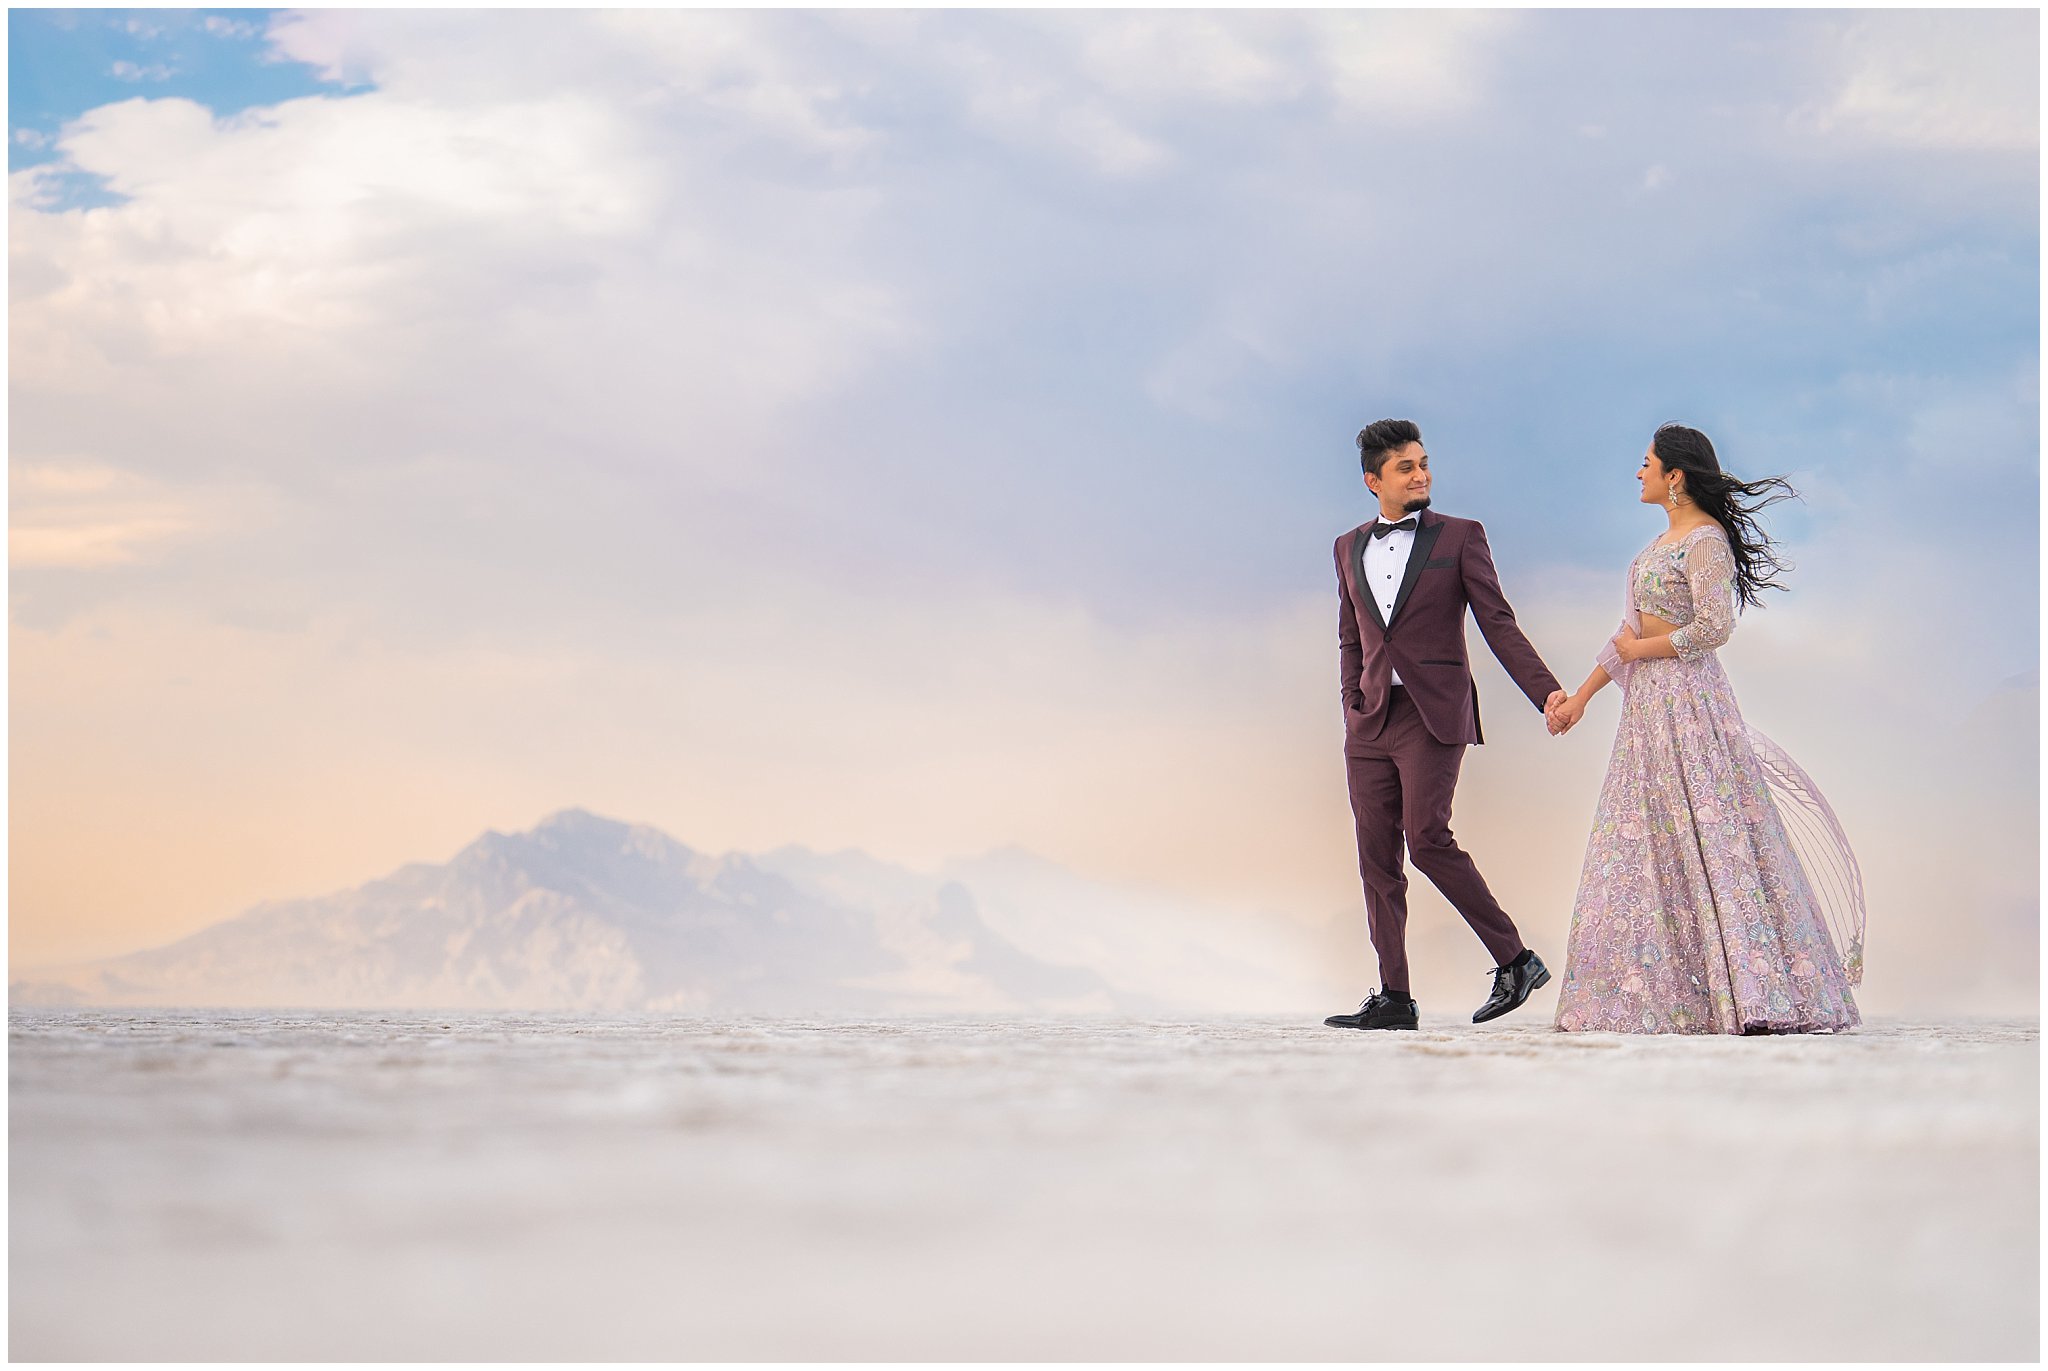 Couple walking during Indian wedding session at the Bonneville Salt Flats